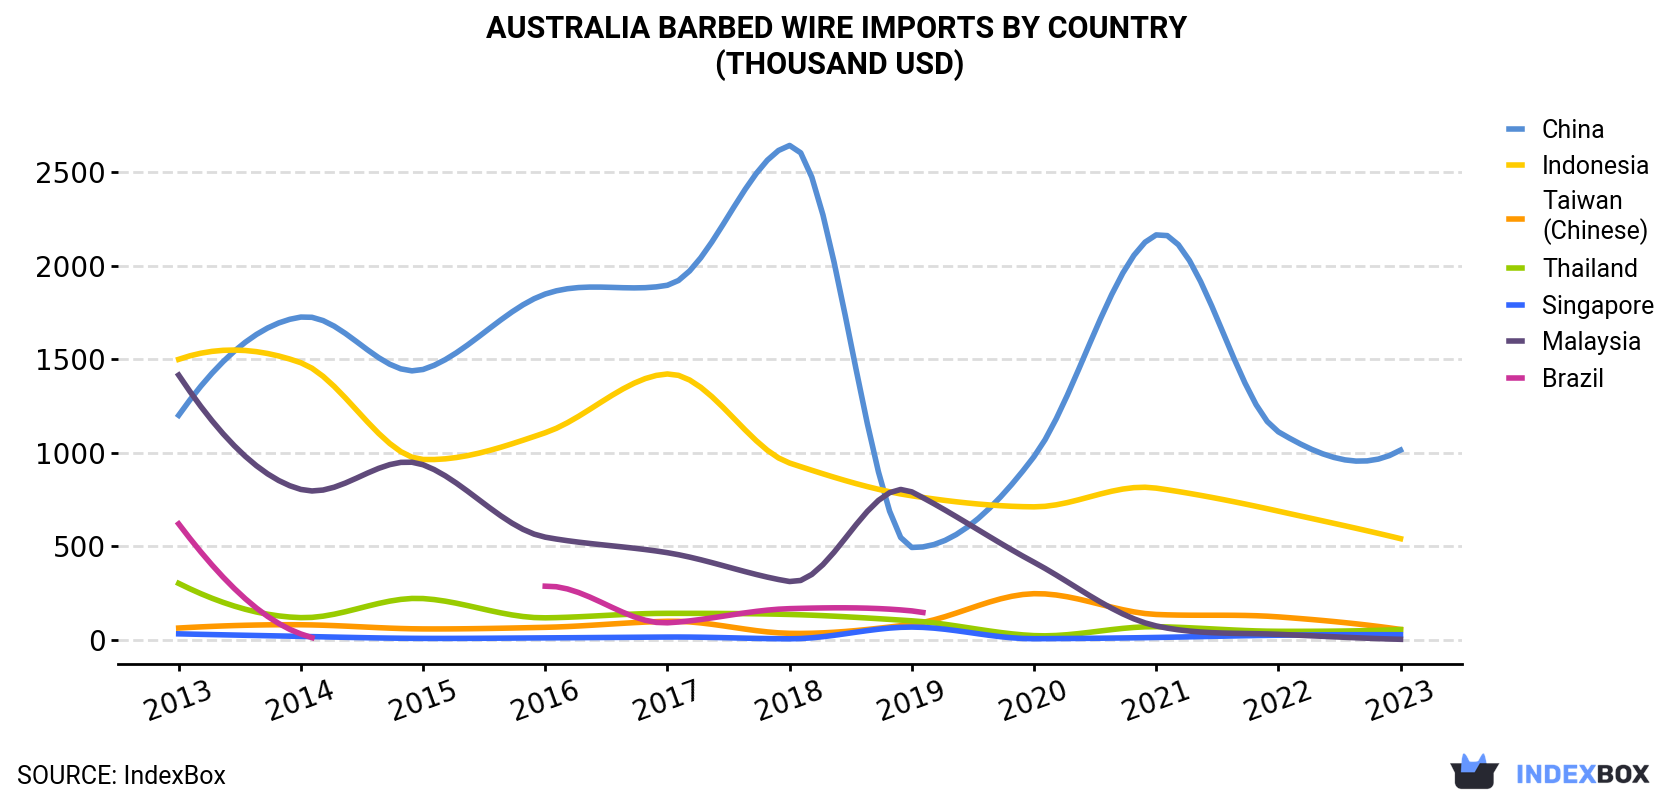 Australia Barbed Wire Imports By Country (Thousand USD)